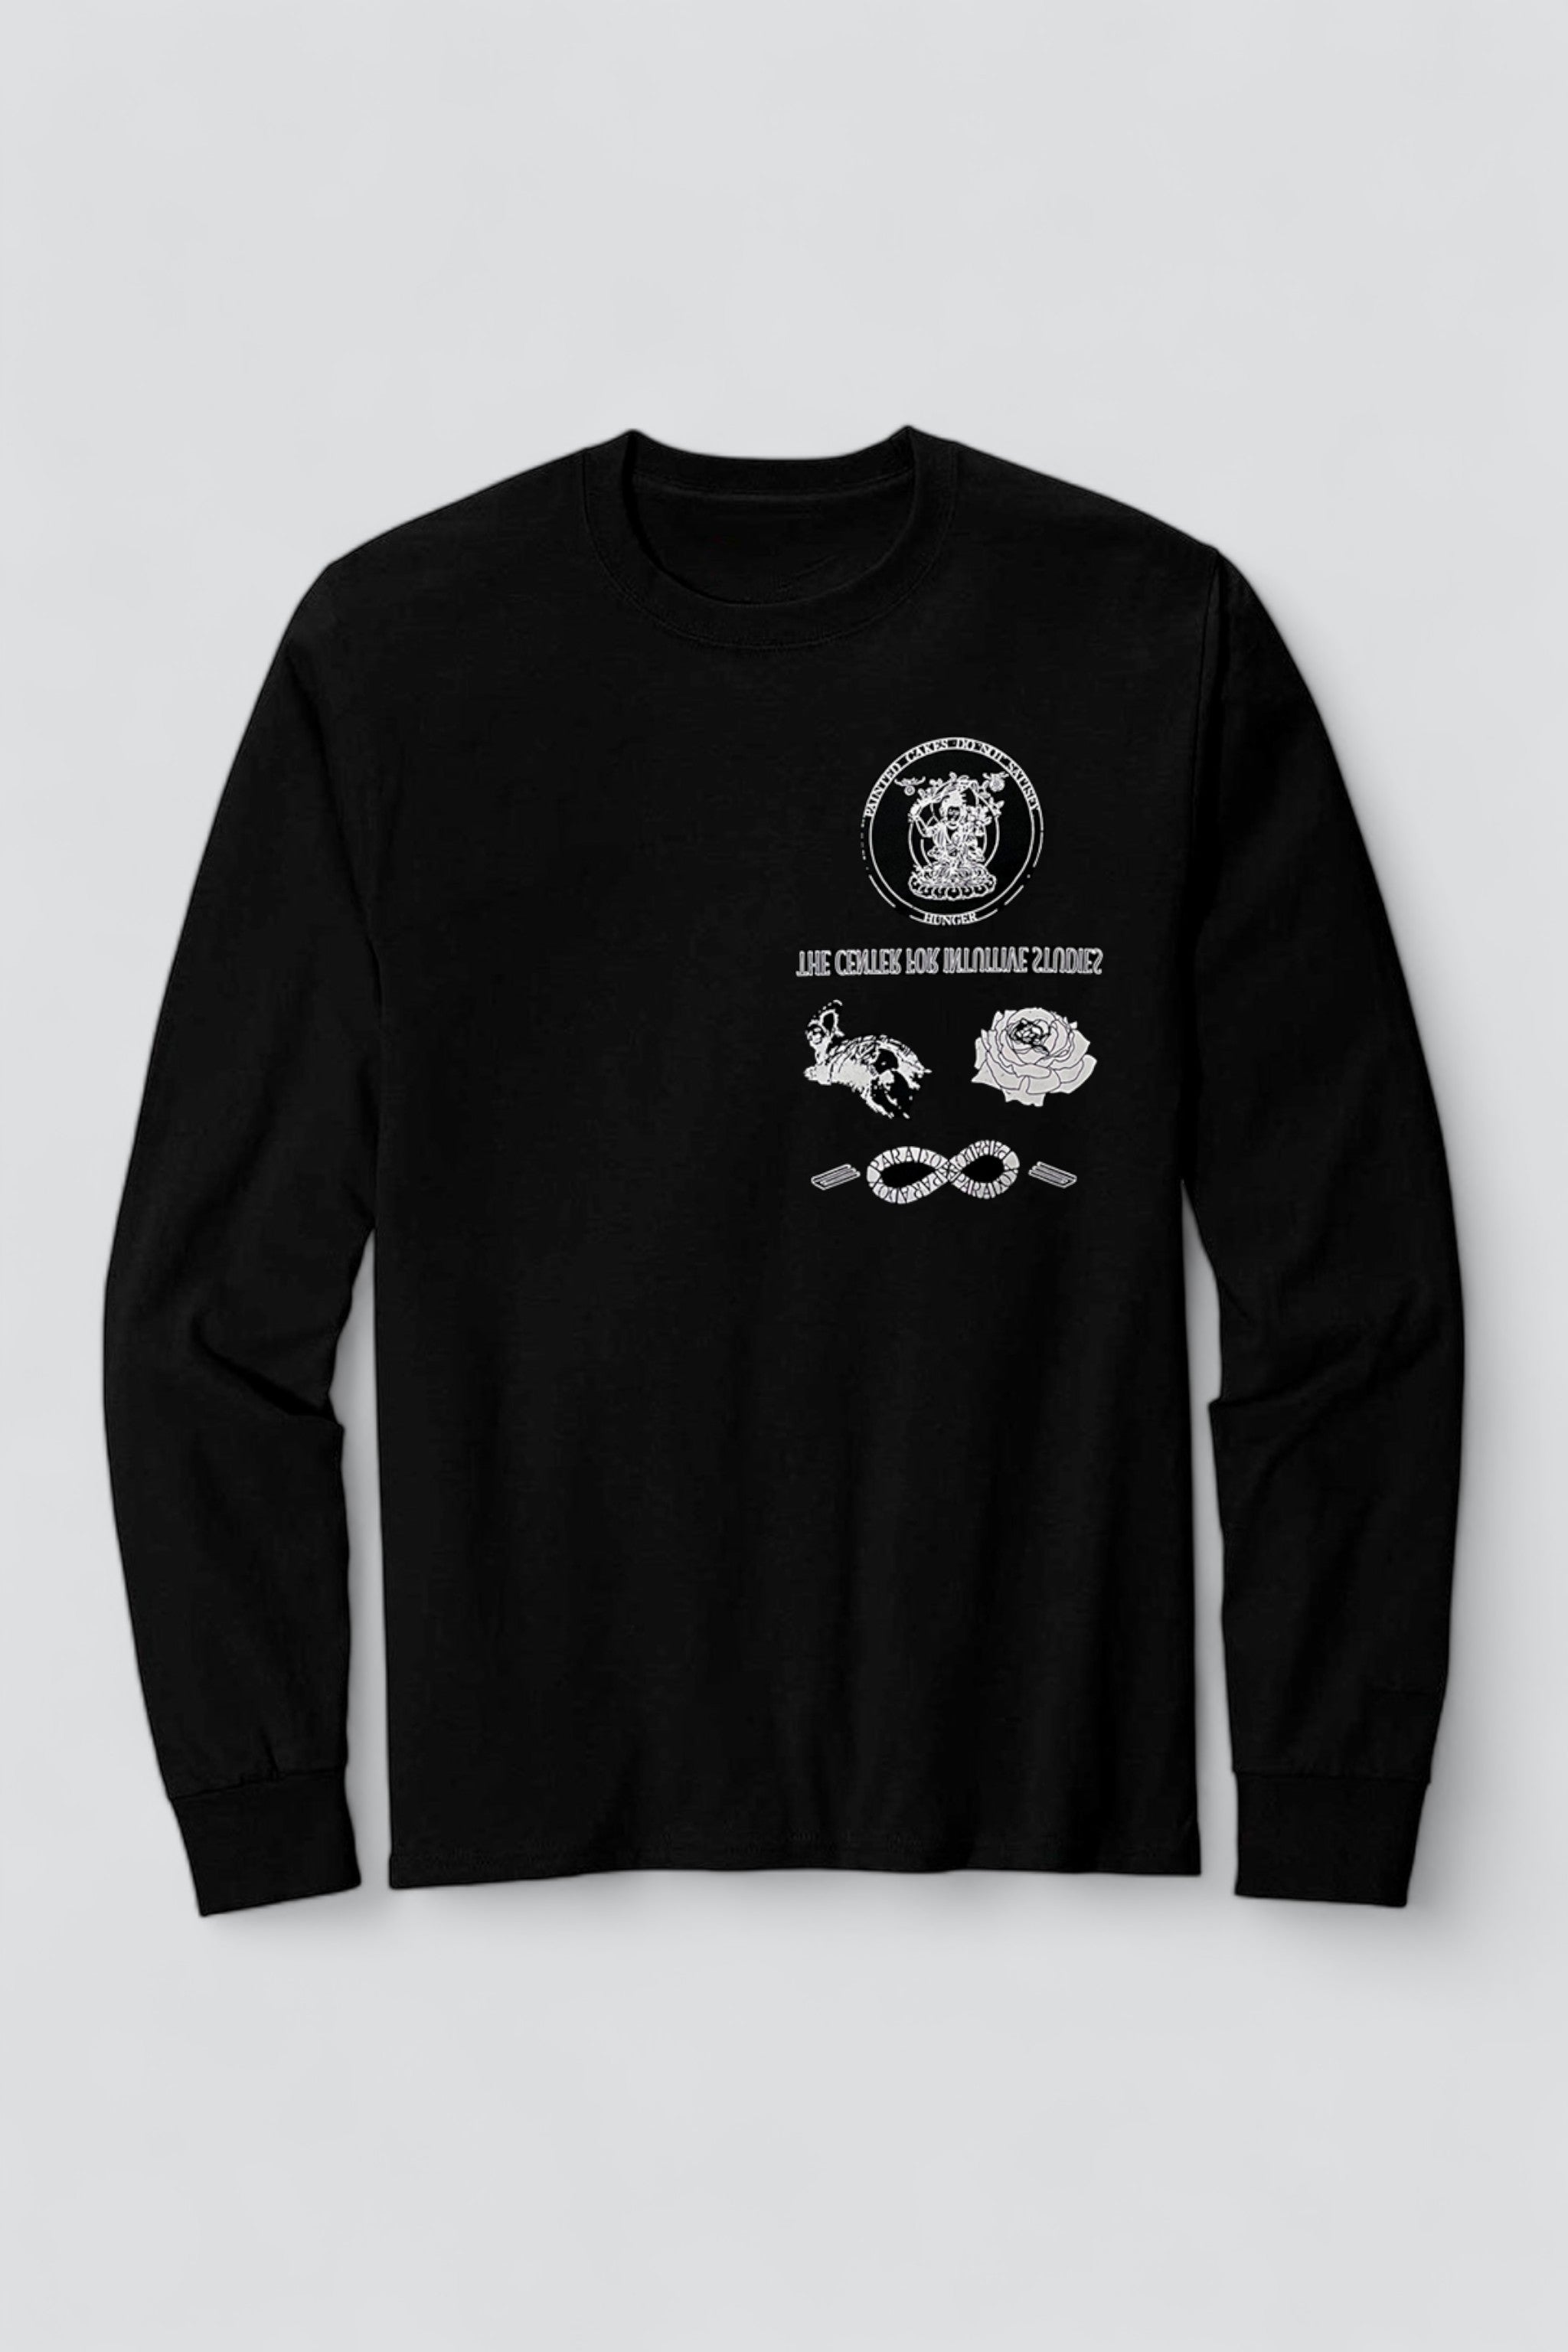 The Center For Intuitive Studies Long Sleeve - Black